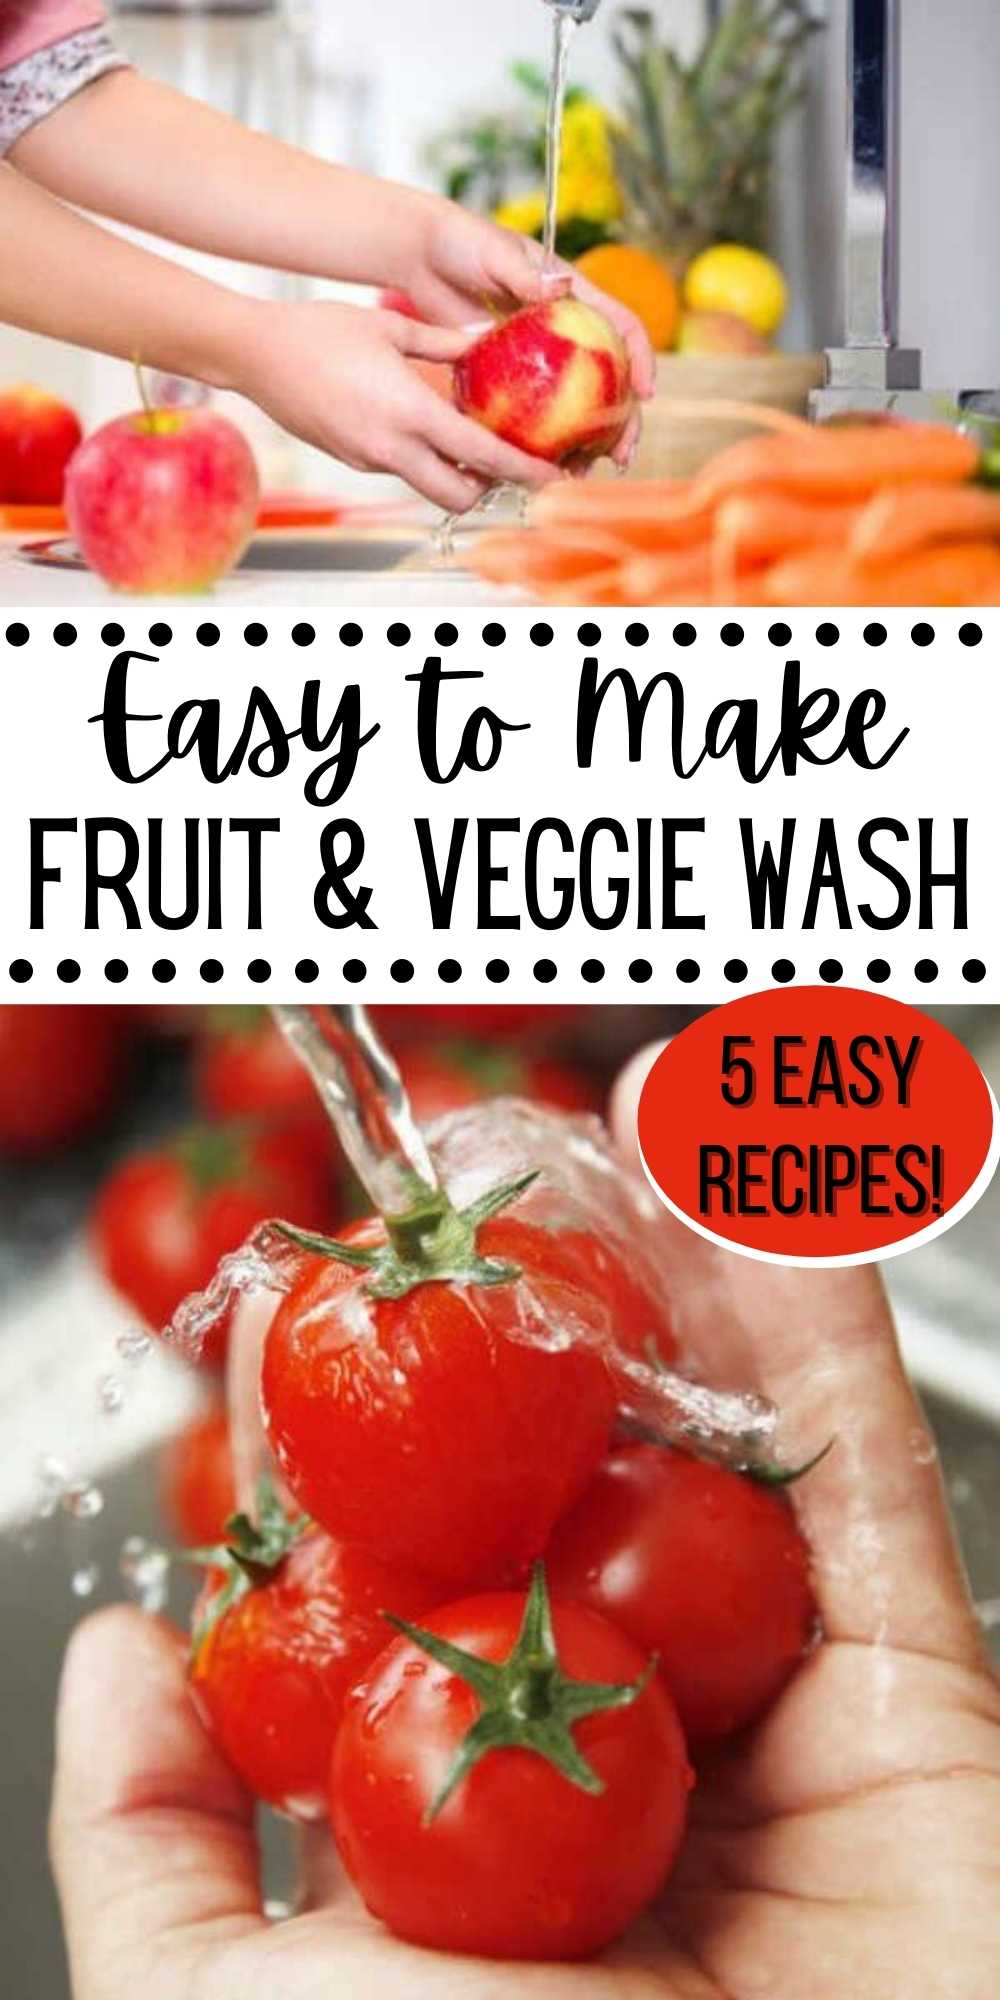 How to make your own fruit and vegetable wash with a few simple ingredients